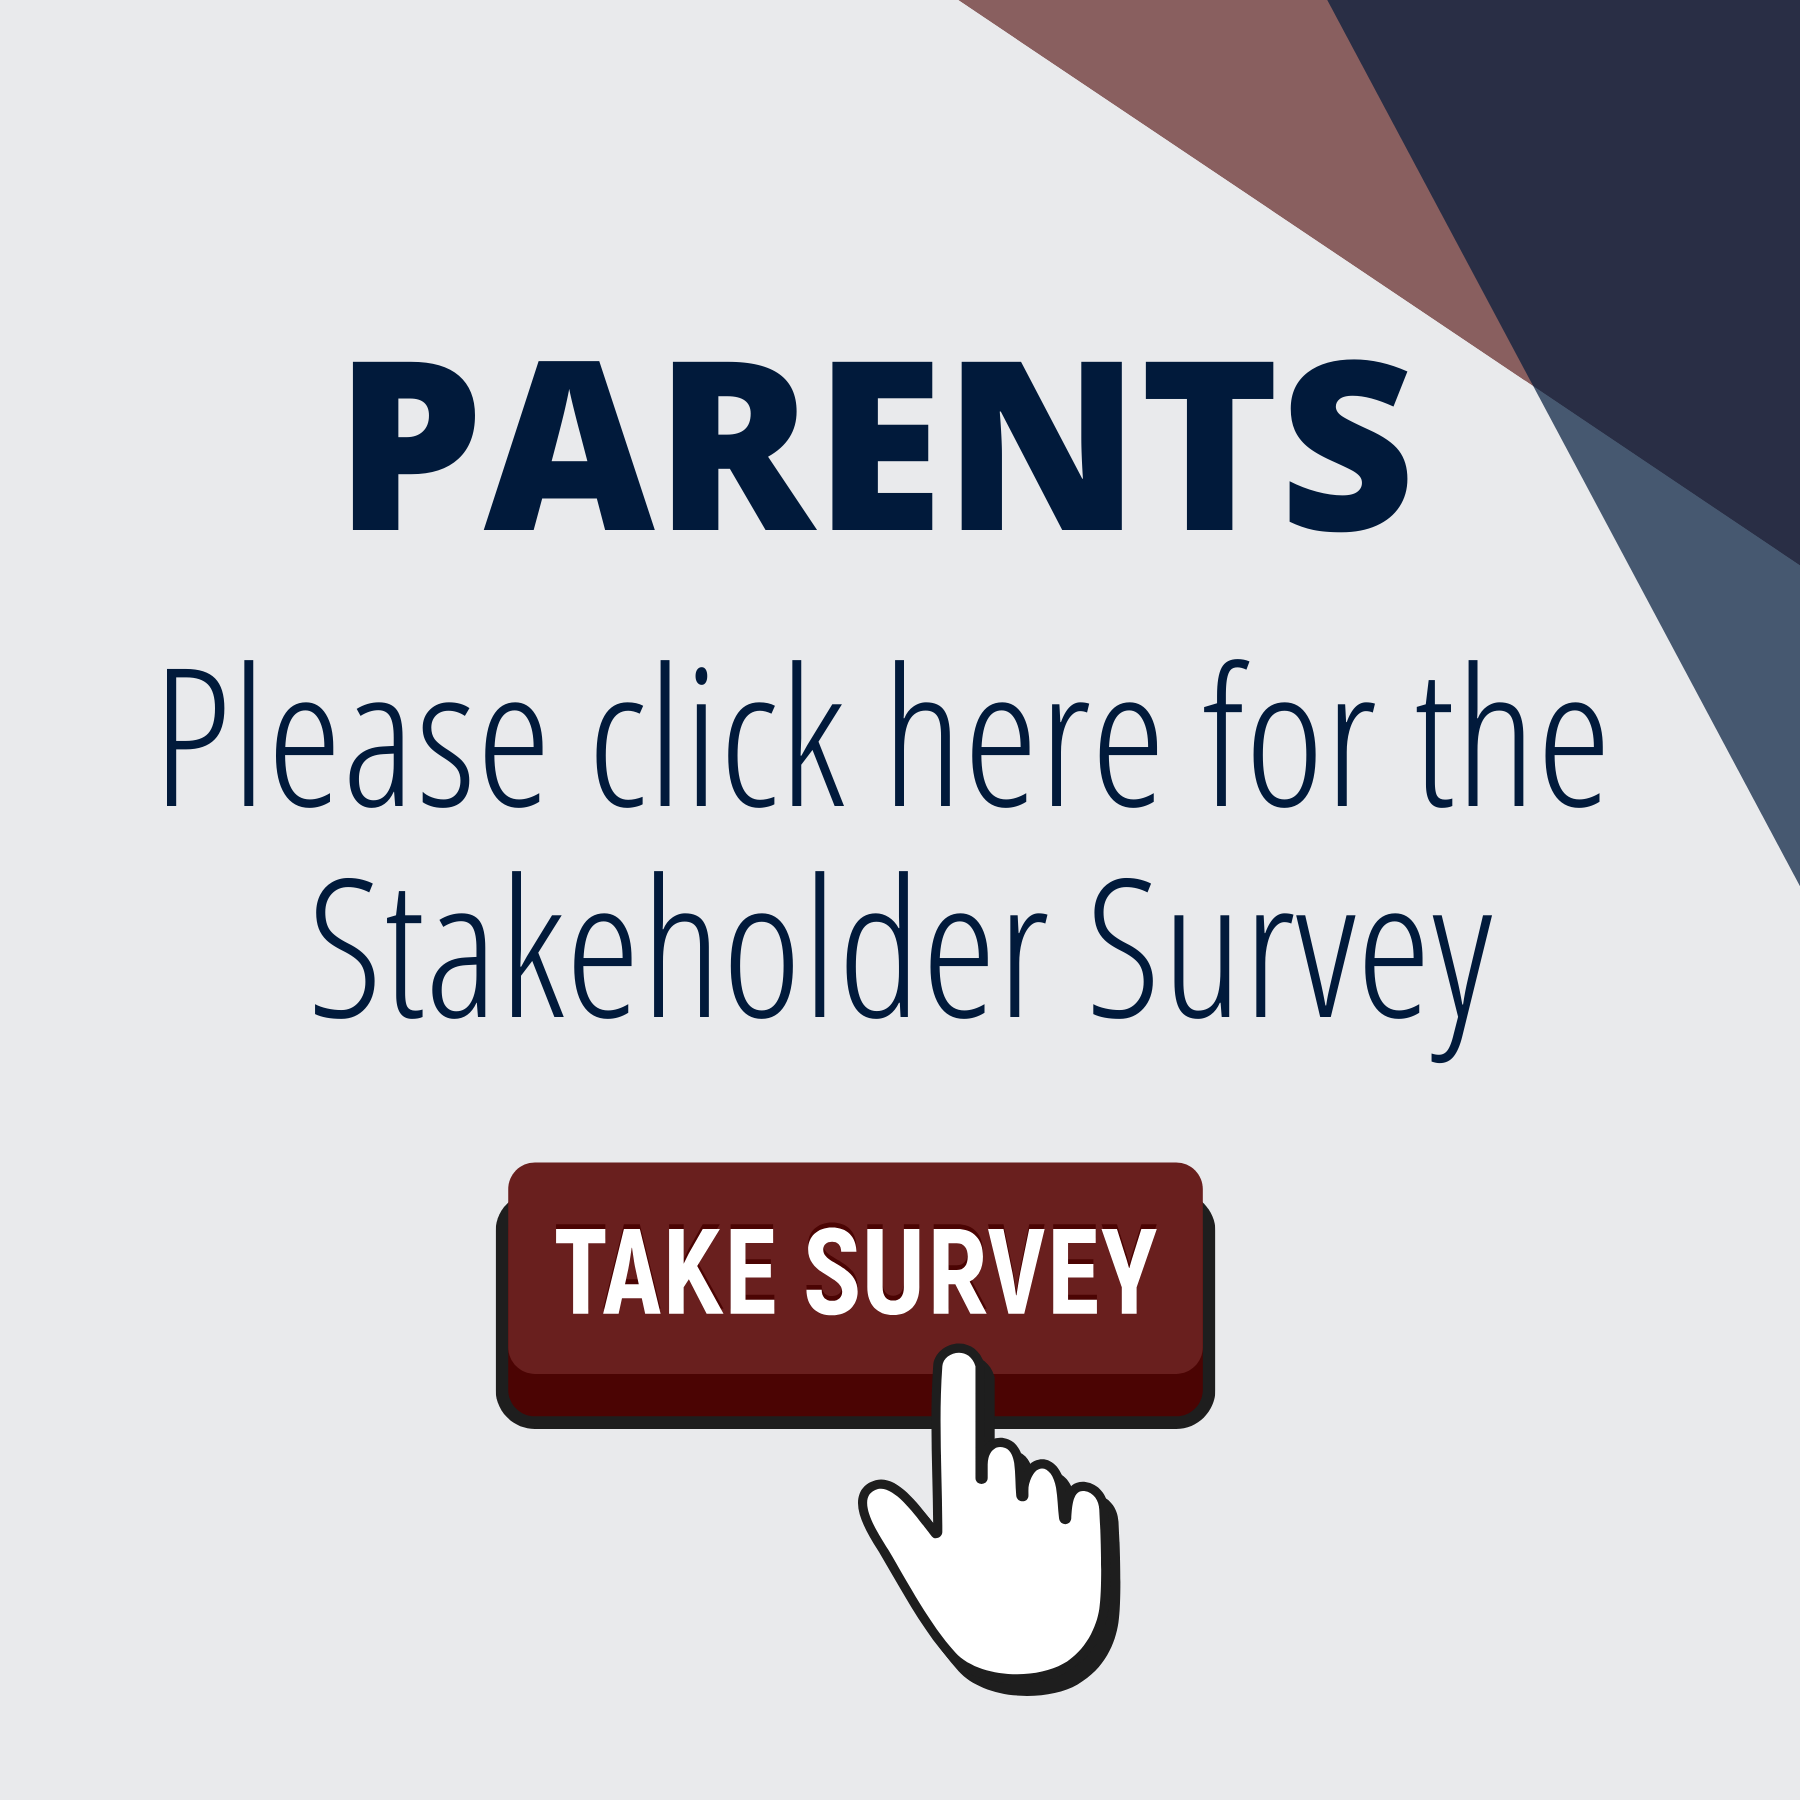 Parents, please click here for the stakeholder survey.